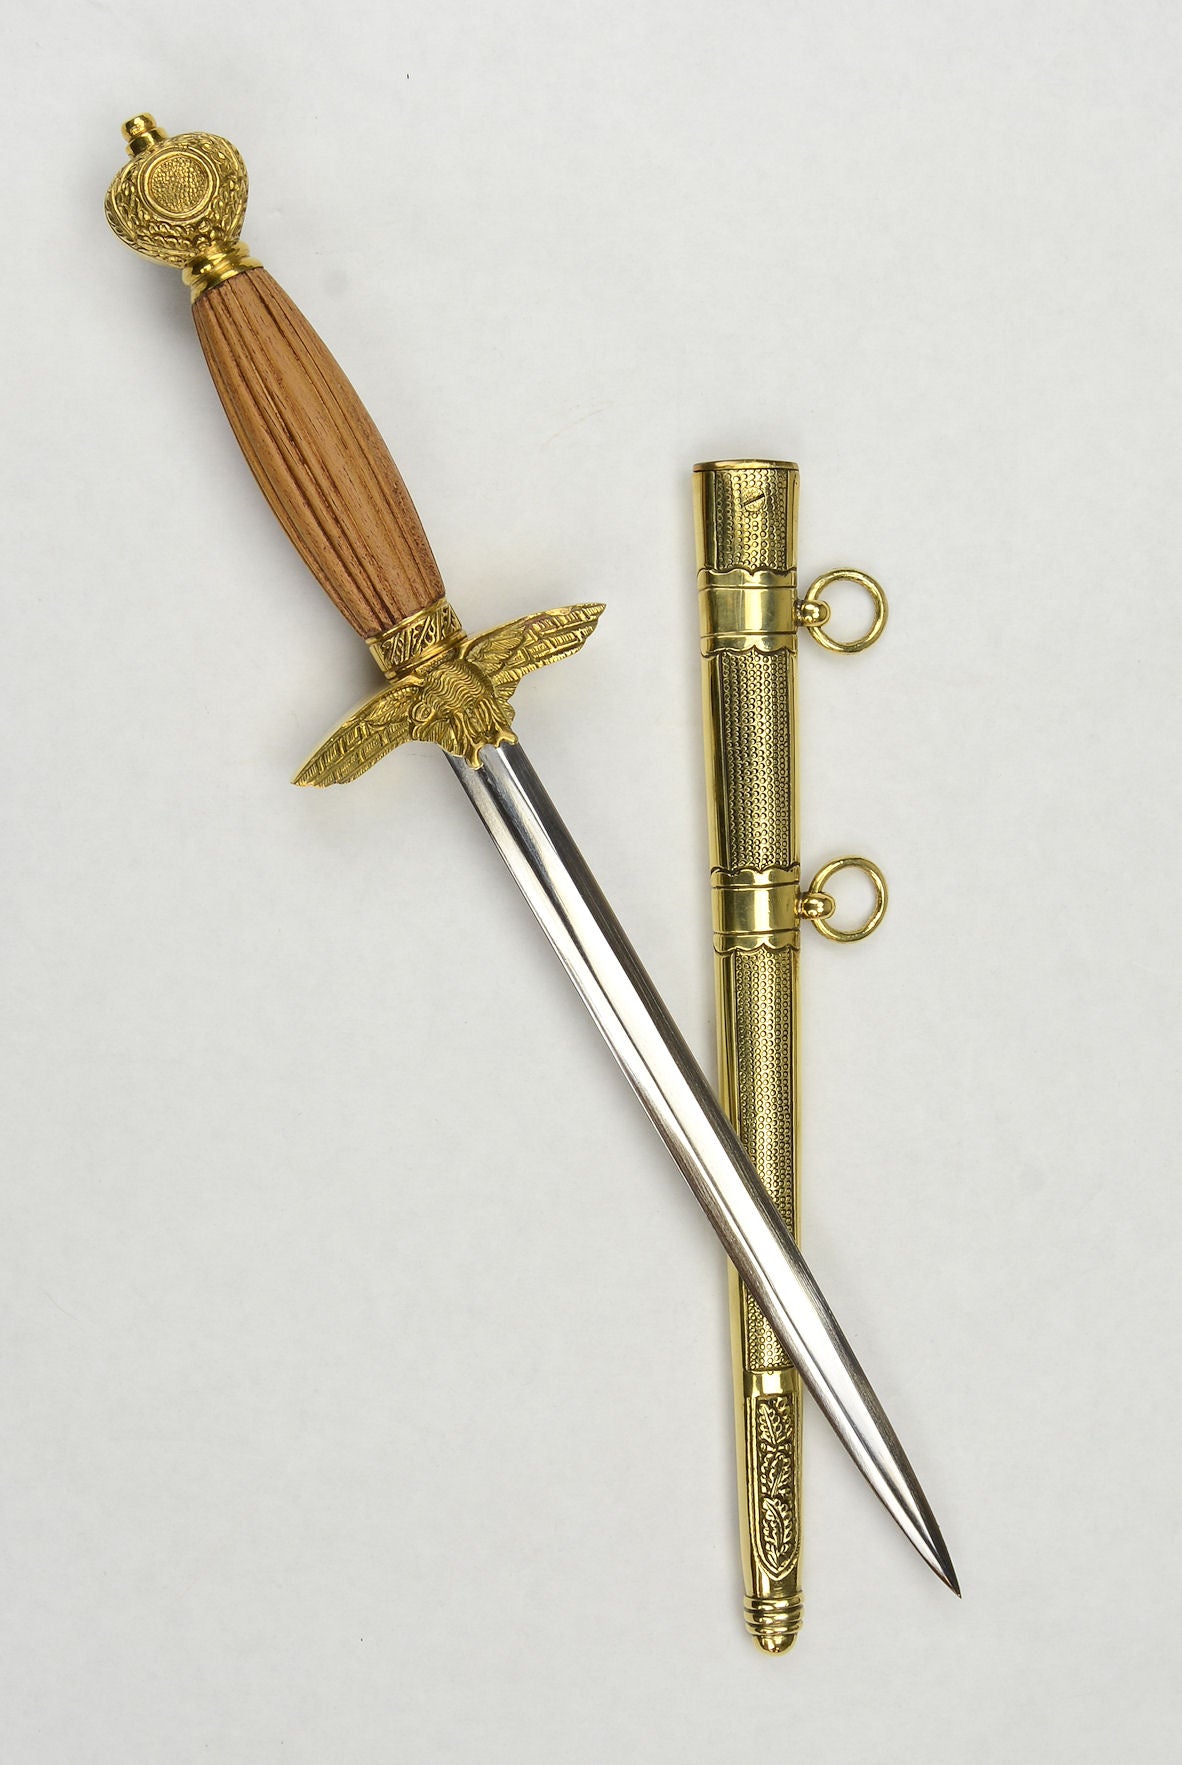 Luftwaffe Dagger without Party symbols